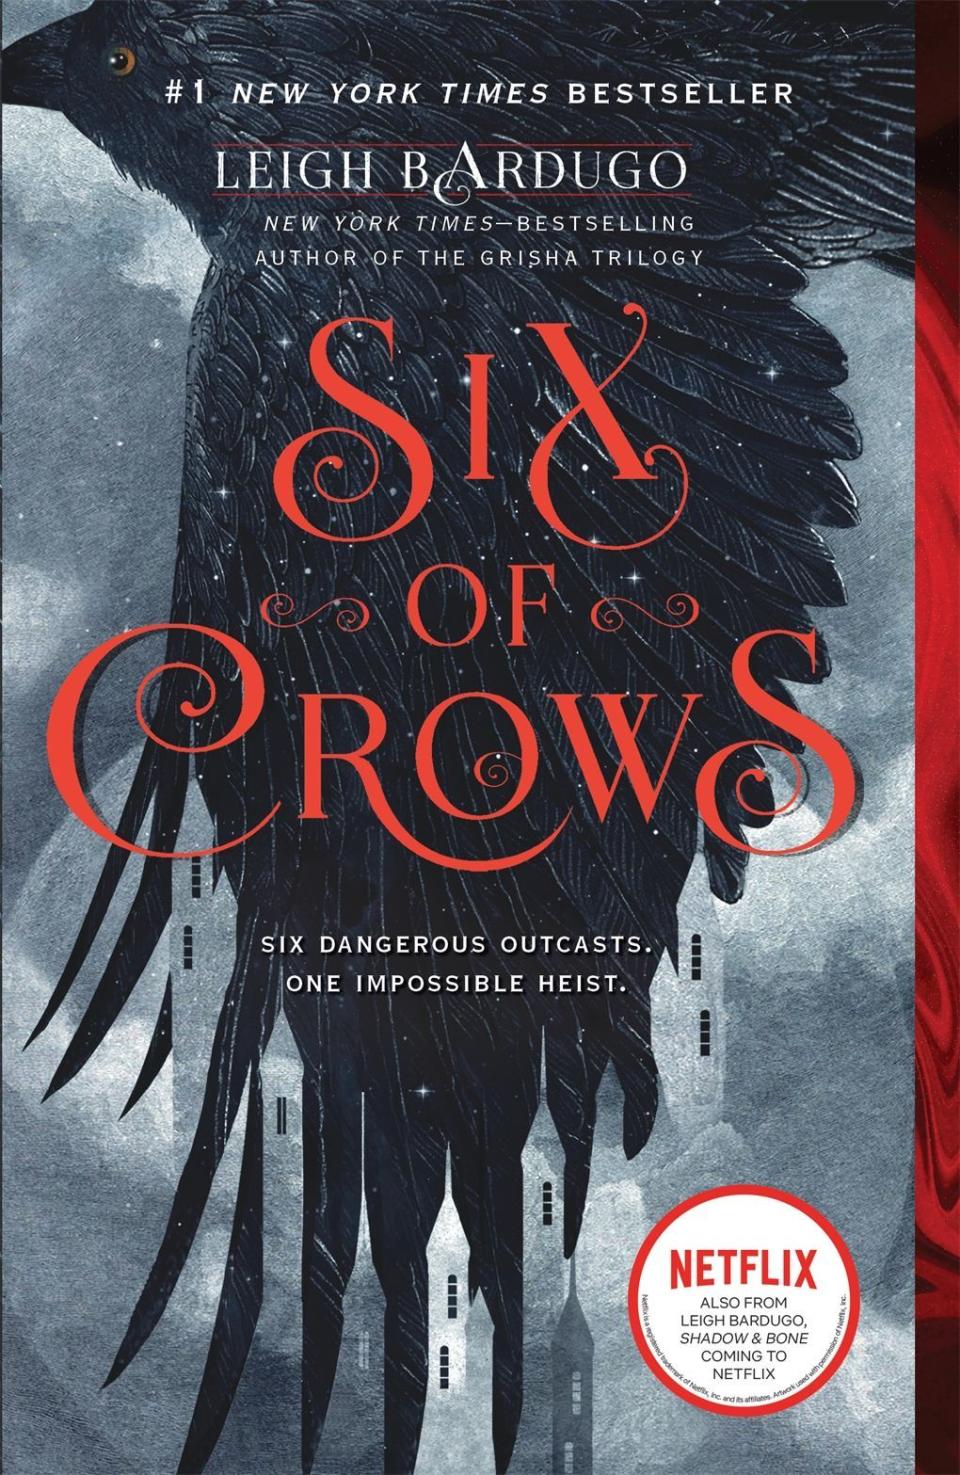 2) "Six of Crows" by Leigh Bardugo